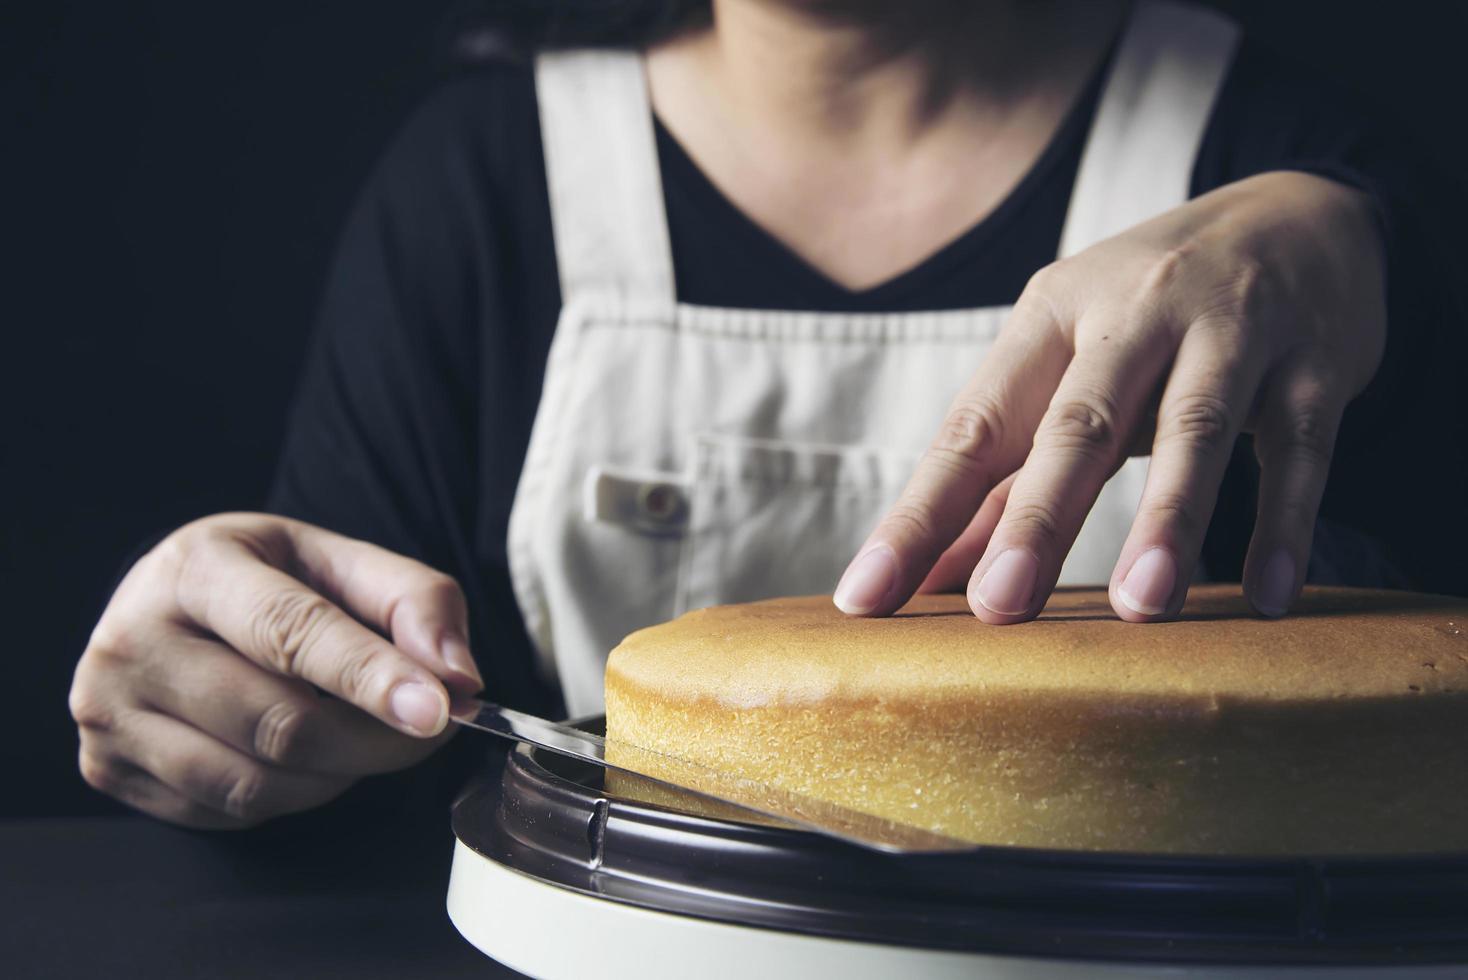 Lady making cake putting cream using spatula - homemade bakery cooking concept photo